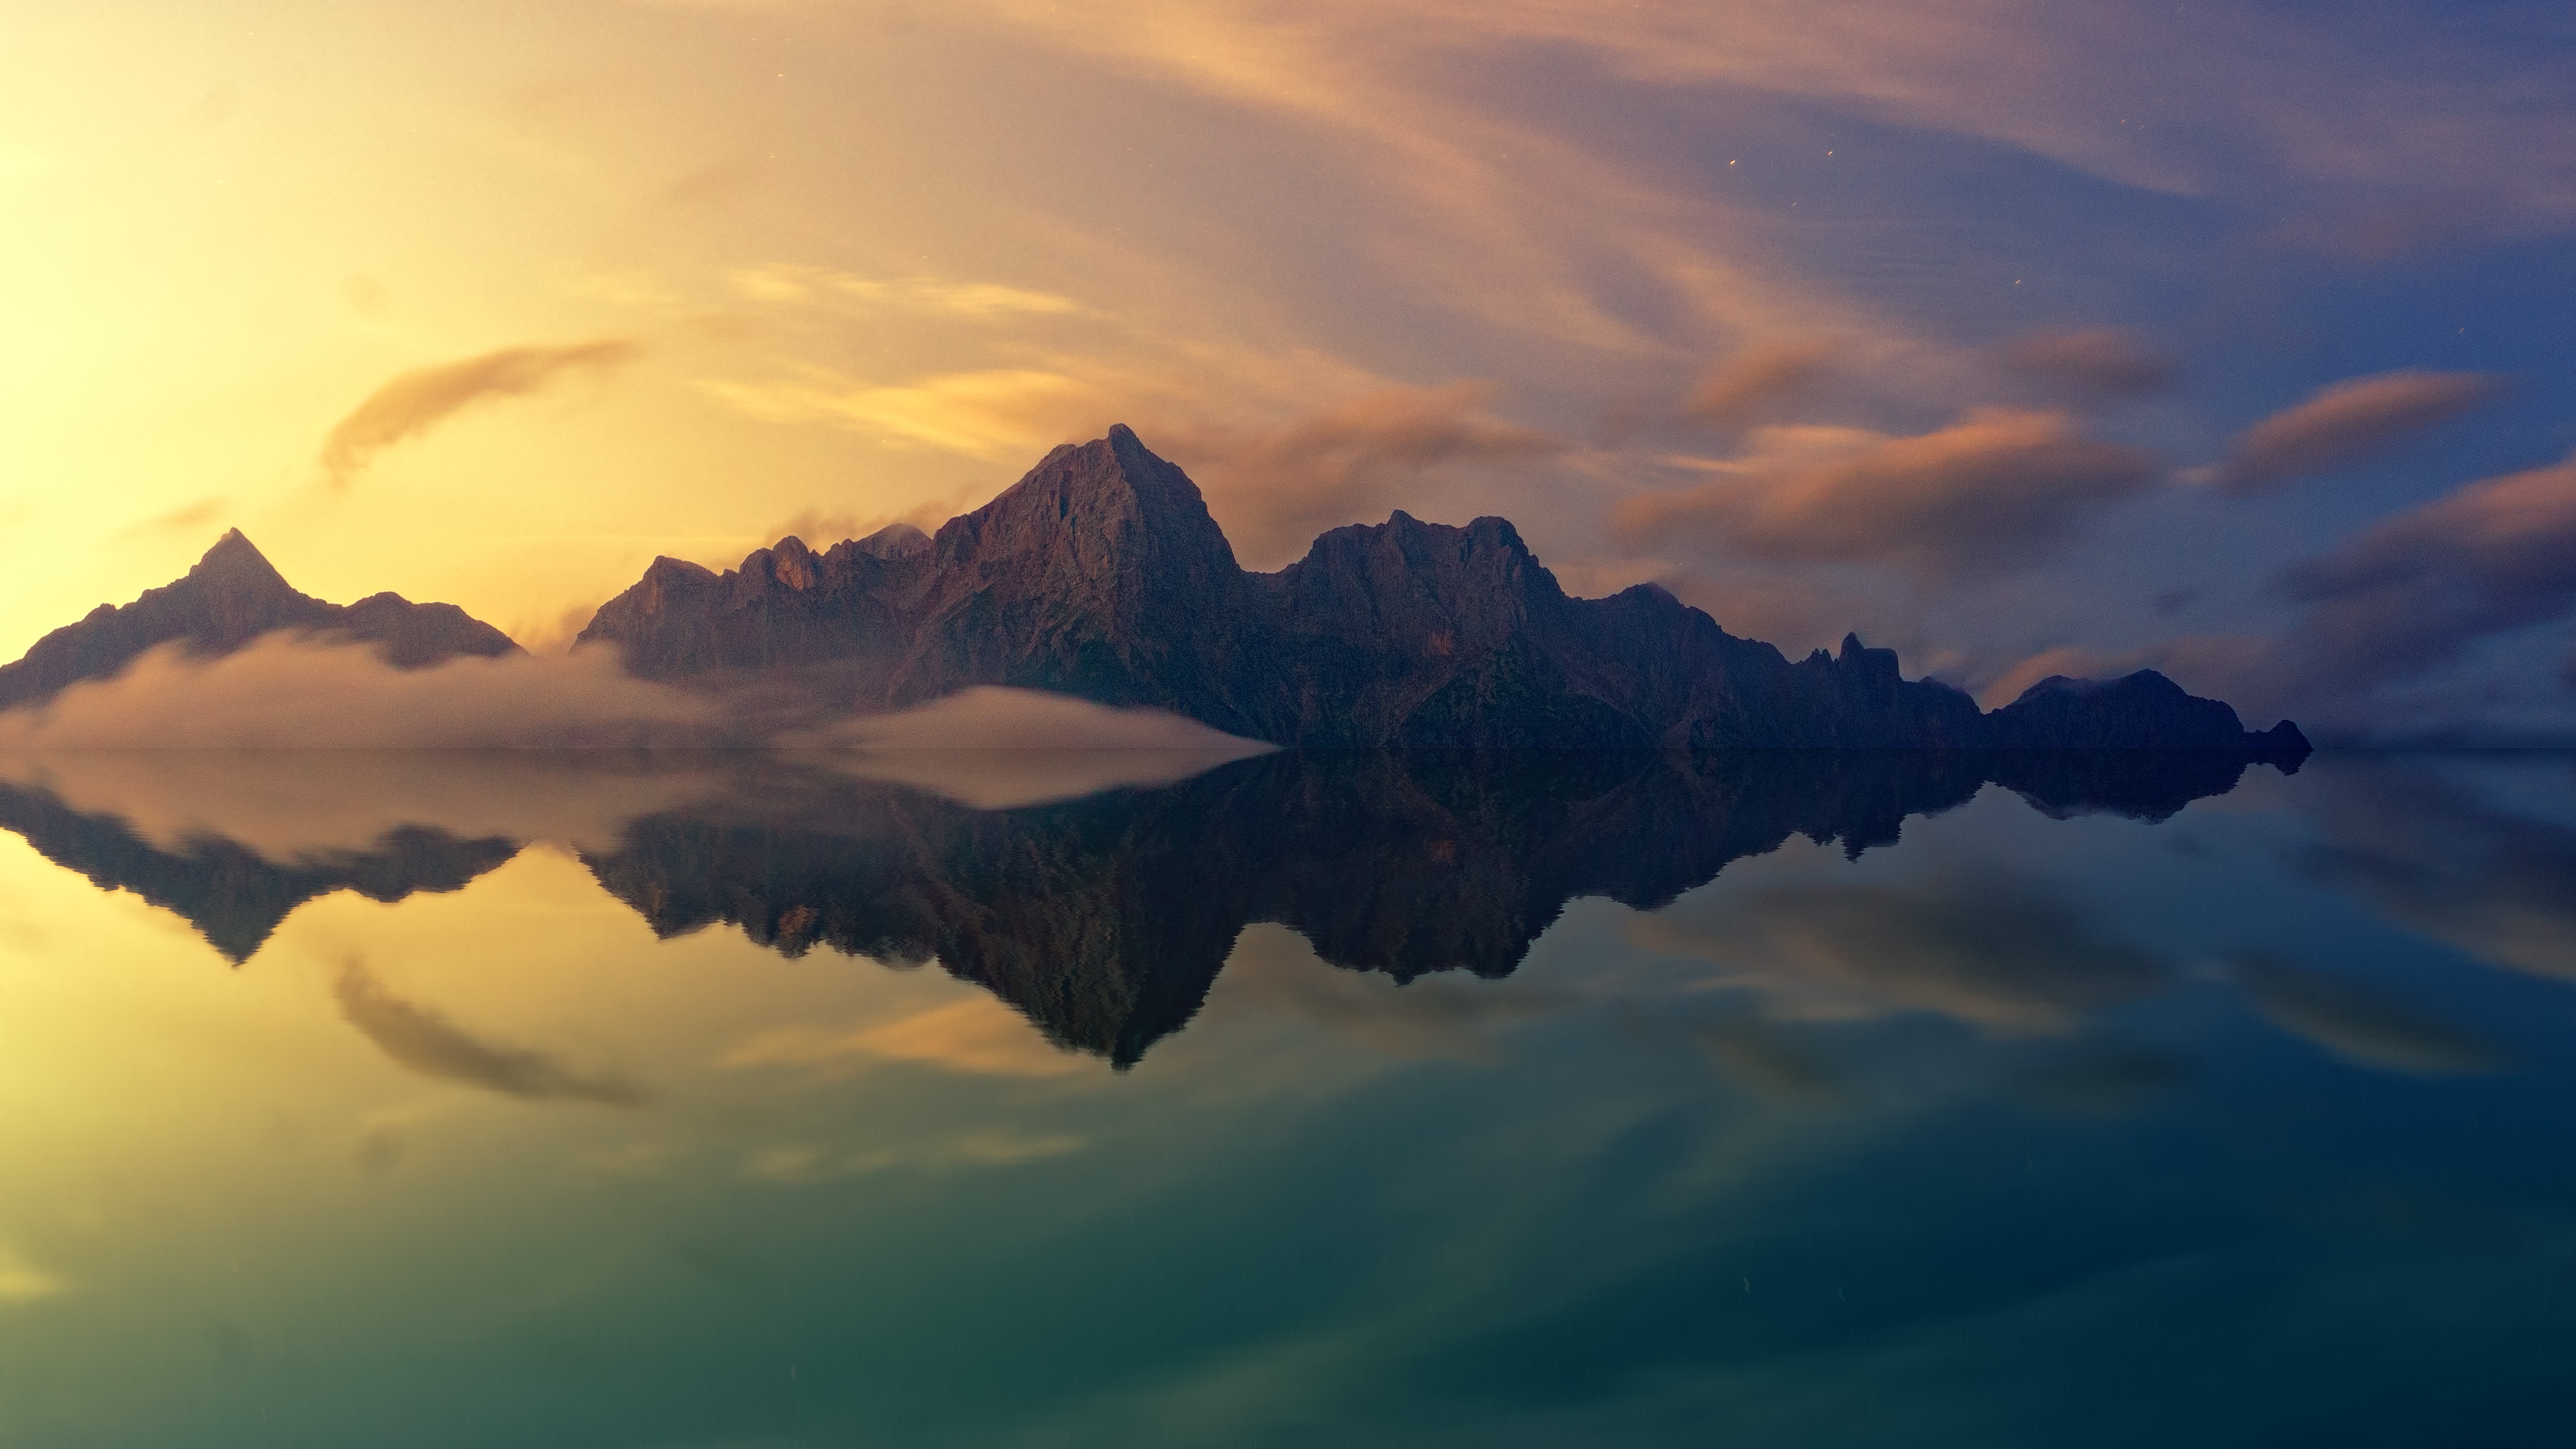 Beautiful Mountains Clear Reflection In Water Hd Nature K Wallpapers Images Backgrounds